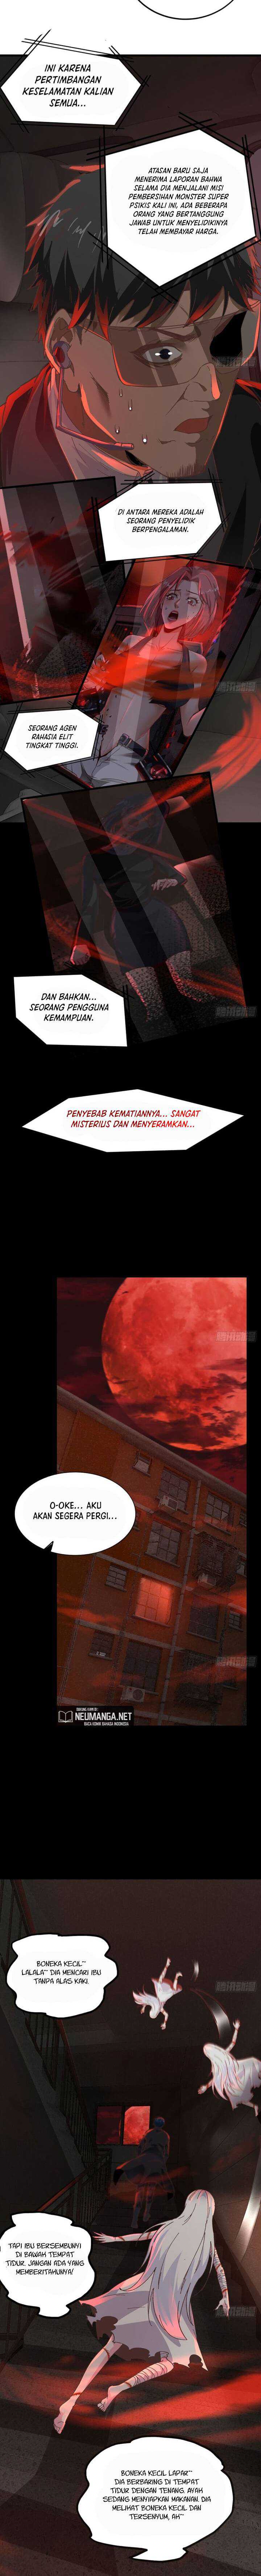 Since The Red Moon Appeared (Hongyue Start) Chapter 53